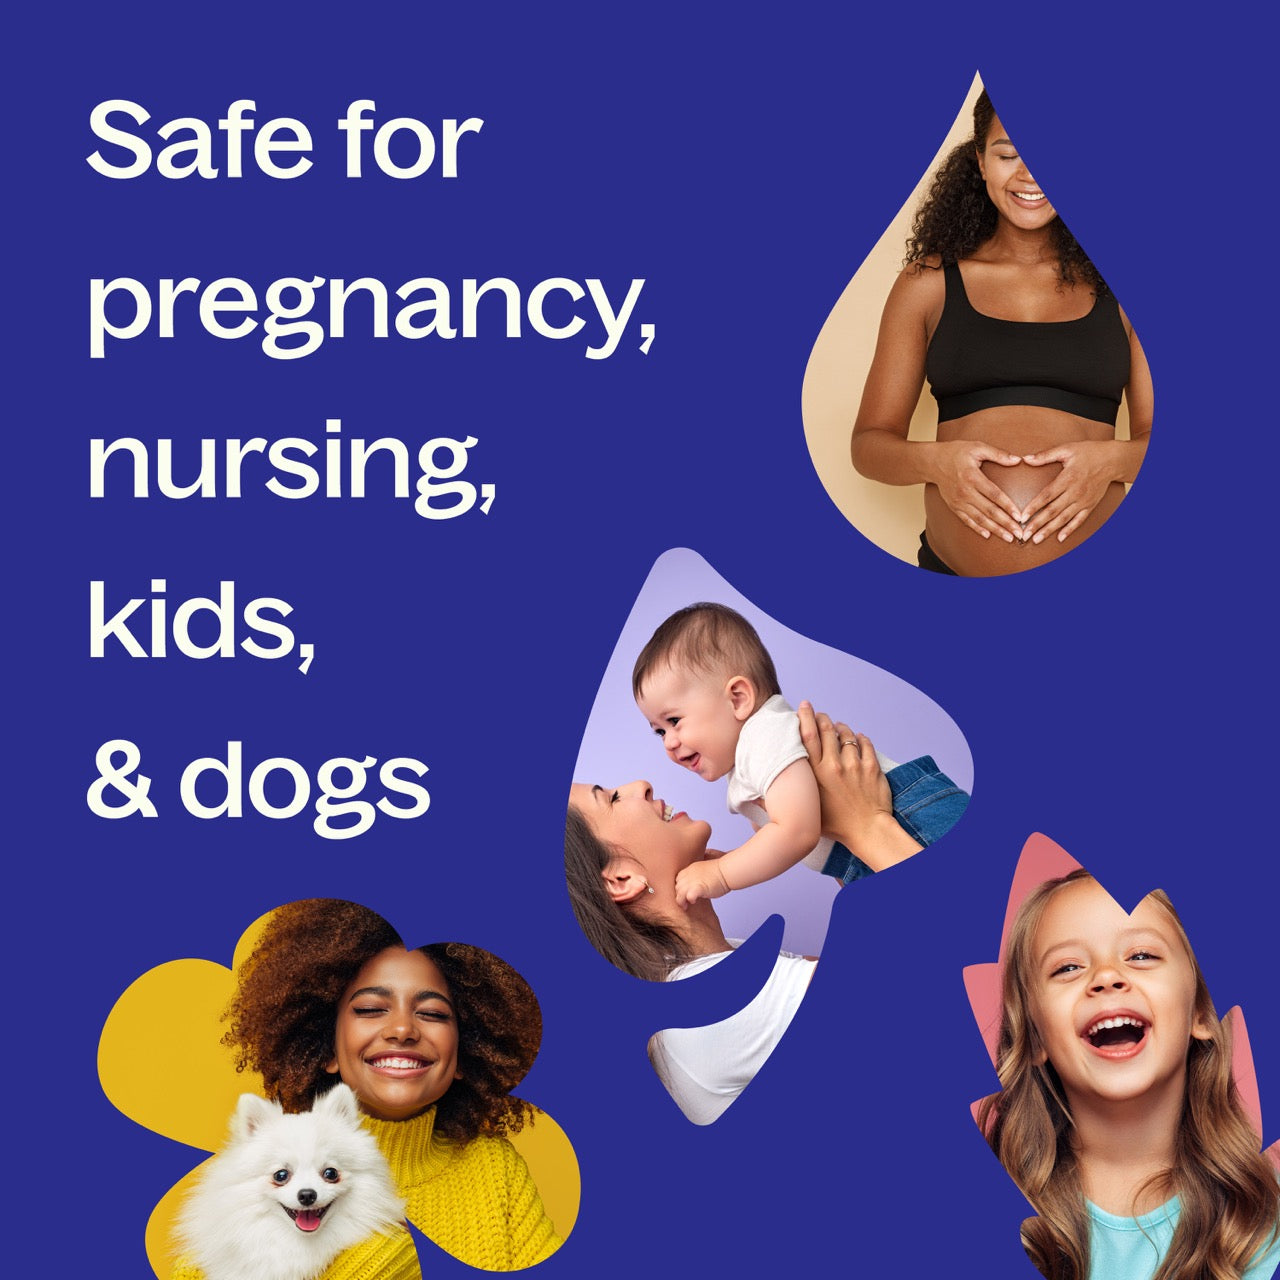 Calming the Child KidSafe Essential Oil is safe for pregnancy, nursing, kids, and dogs